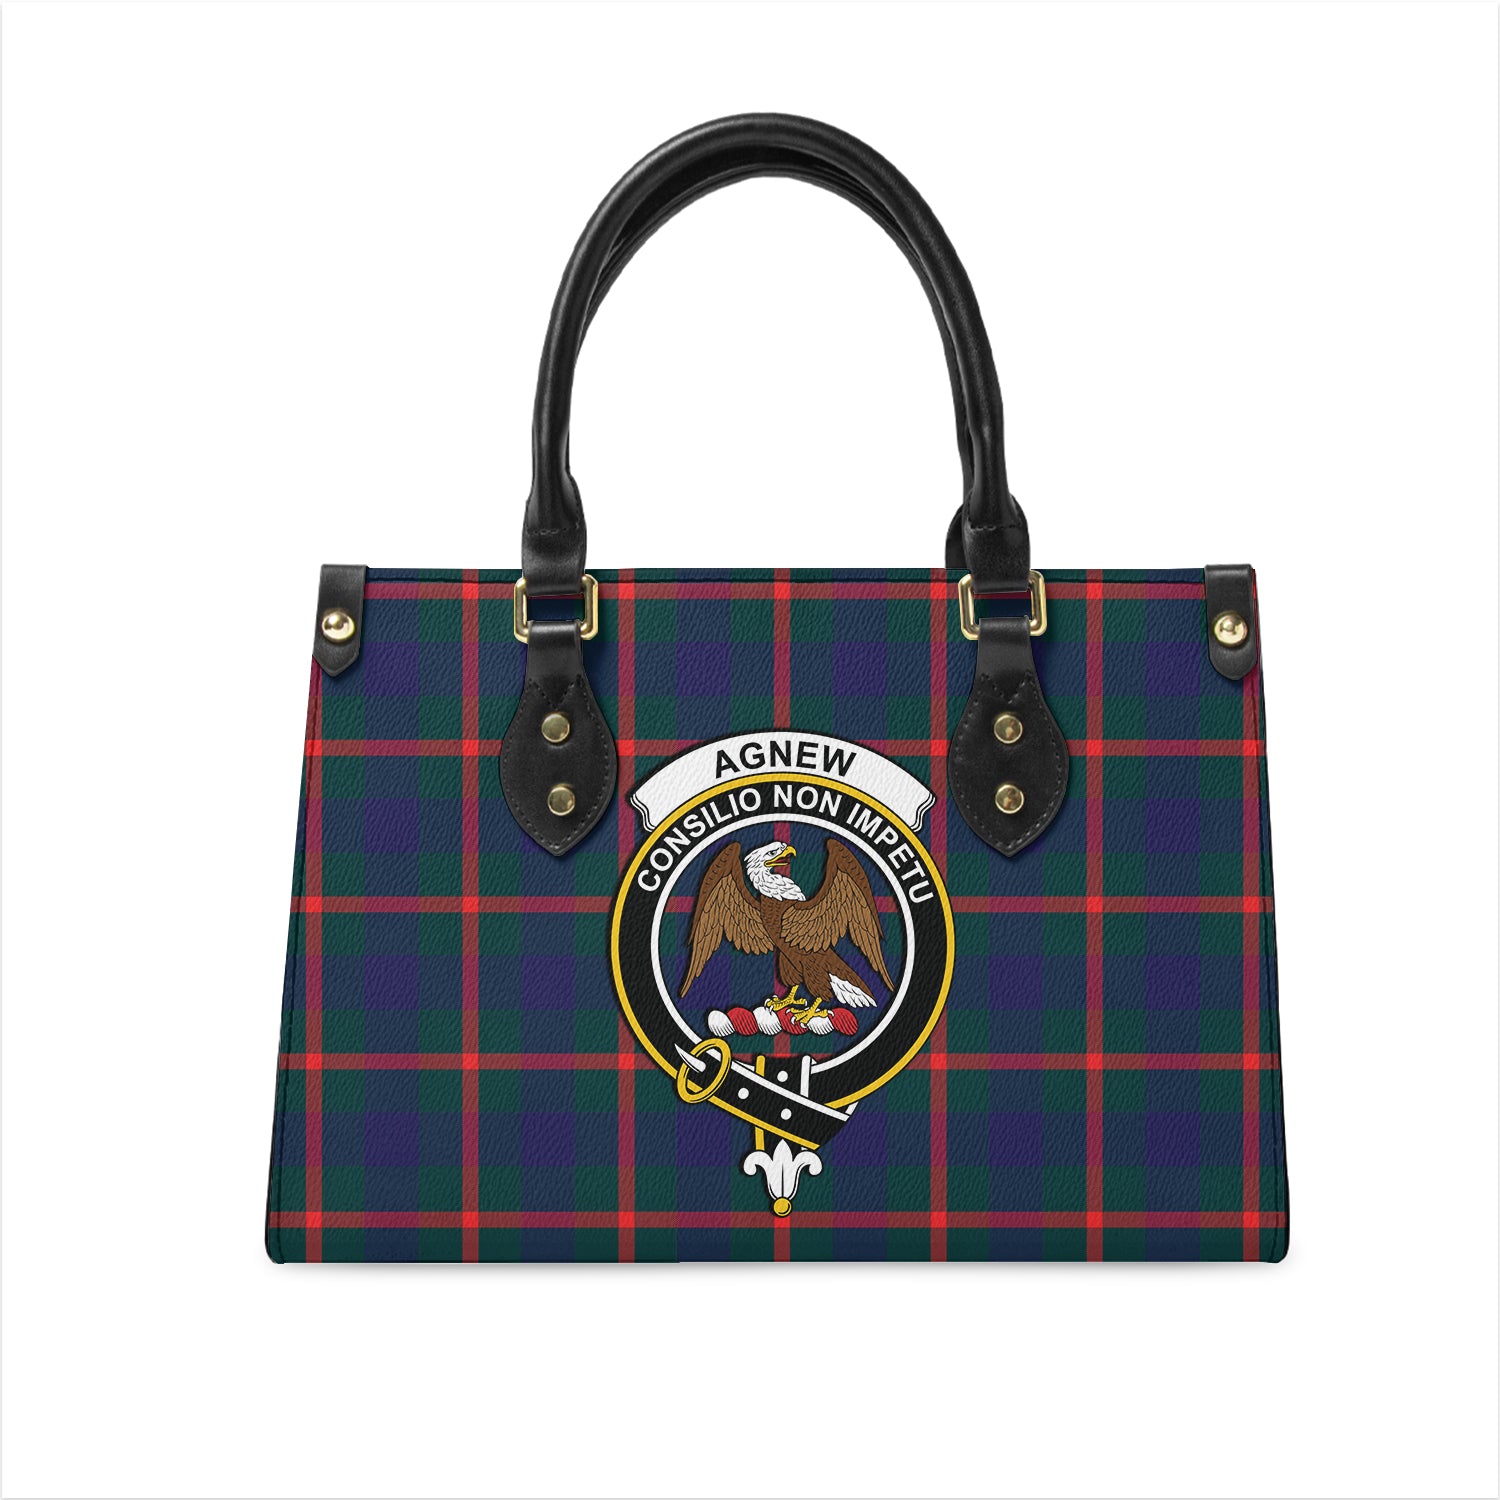 Agnew Modern Tartan Leather Bag with Family Crest One Size 29*11*20 cm - Tartanvibesclothing